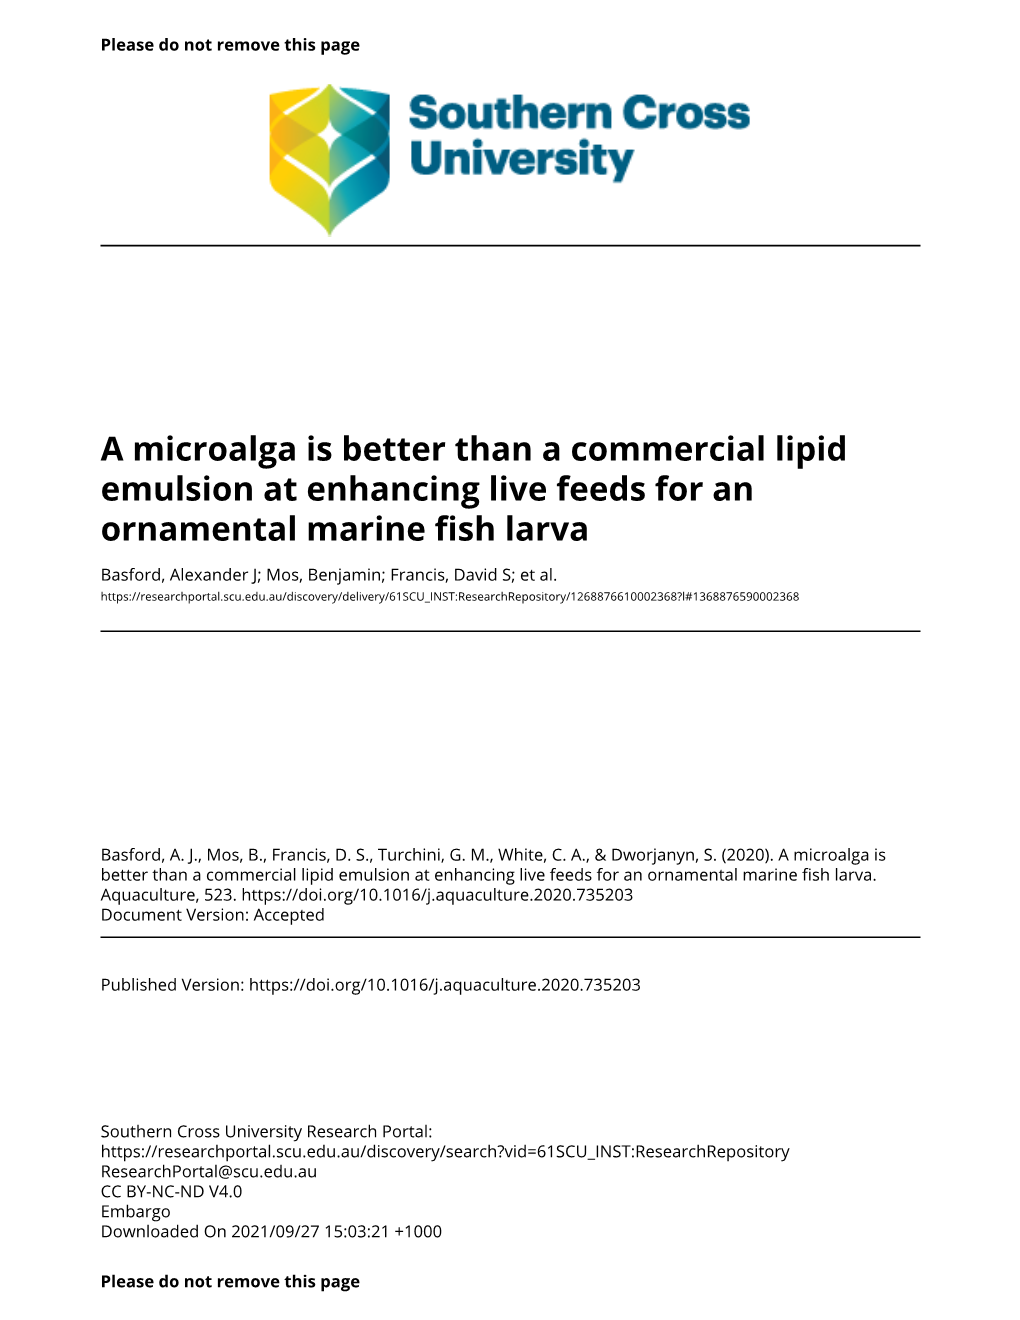 A Microalga Is Better Than a Commercial Lipid Emulsion at Enhancing Live Feeds for an Ornamental Marine Fish Larva